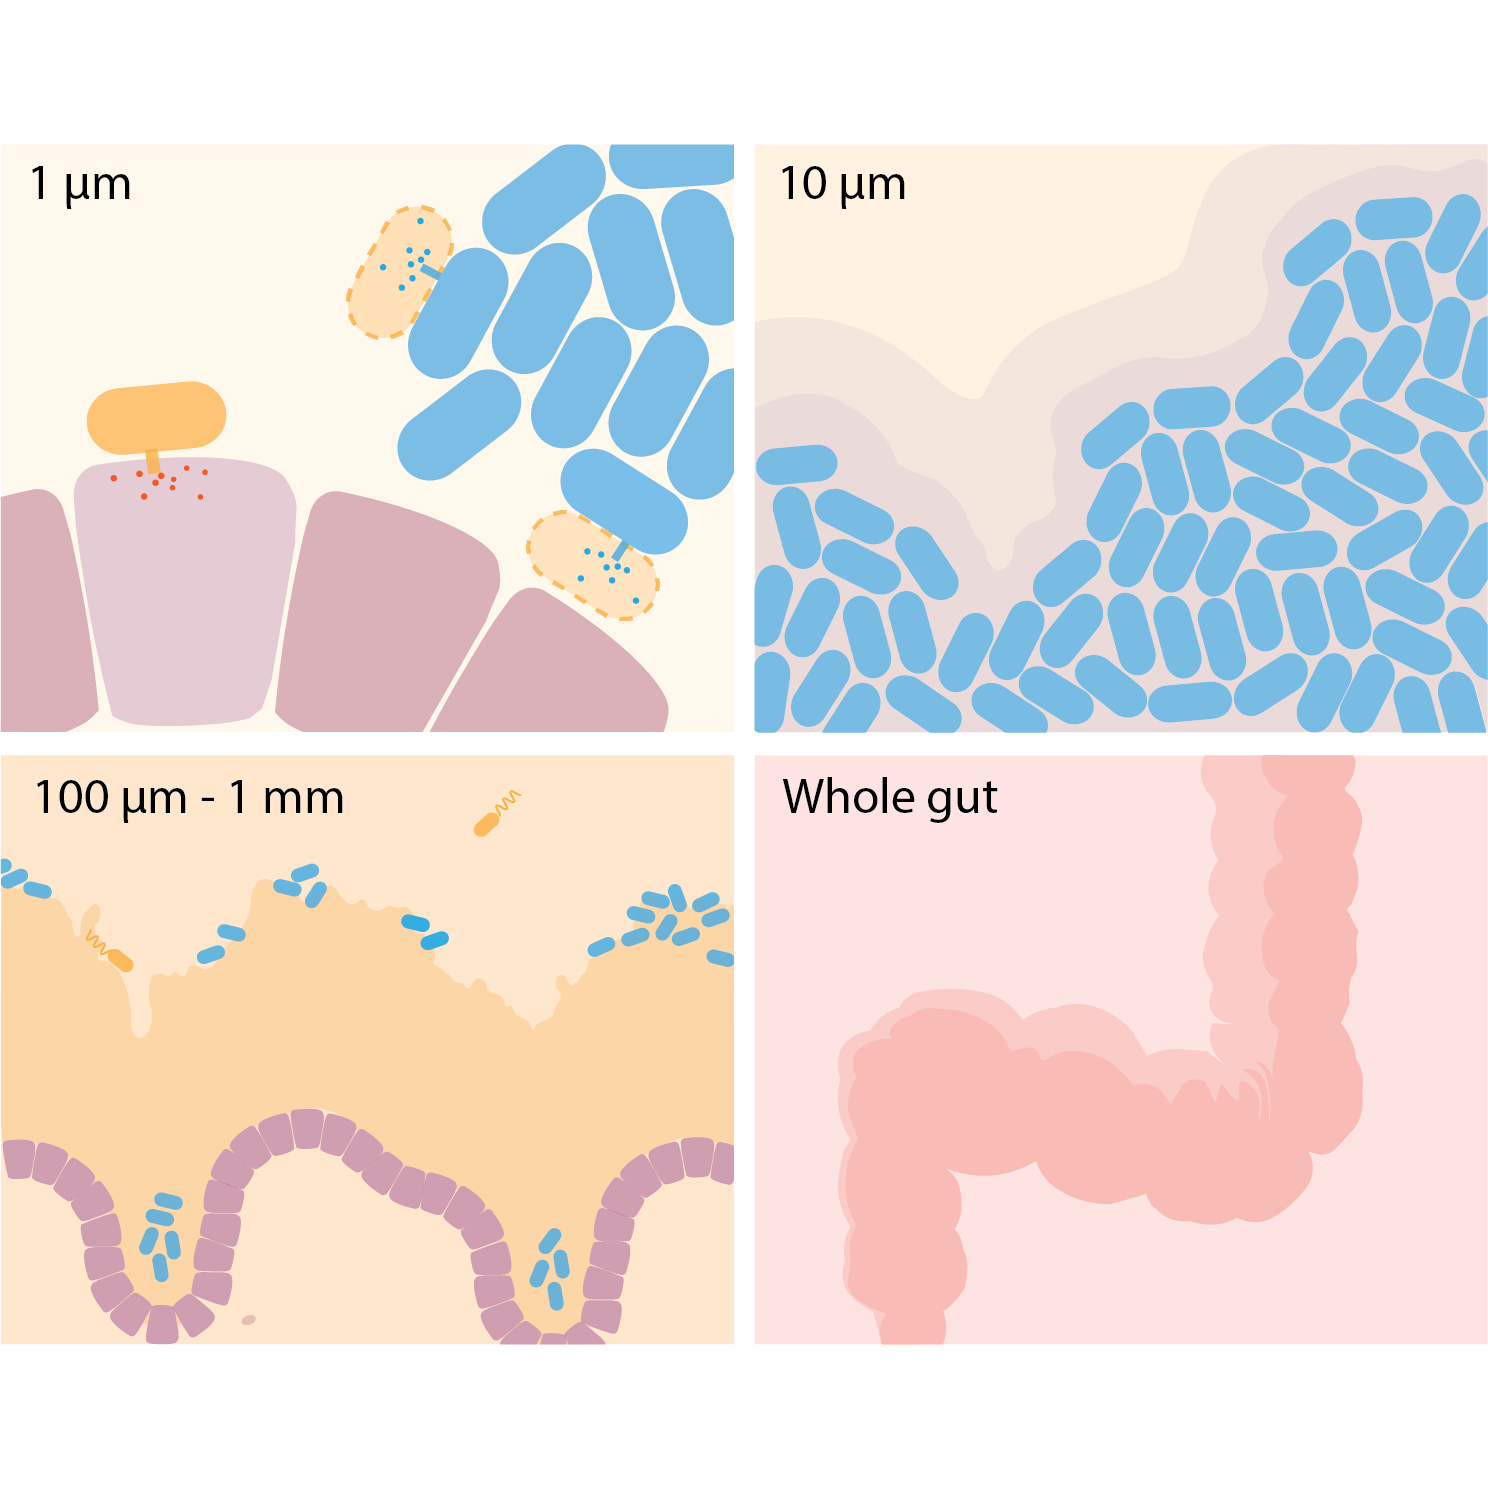 Bacteria at play at various scales in the human gut. Made in Adobe Illustrator. Published as Fig 1 in Nguyen et al. Microbes and Infection, 2021. DOI: https://doi.org/10.1016/j.micinf.2021.104815